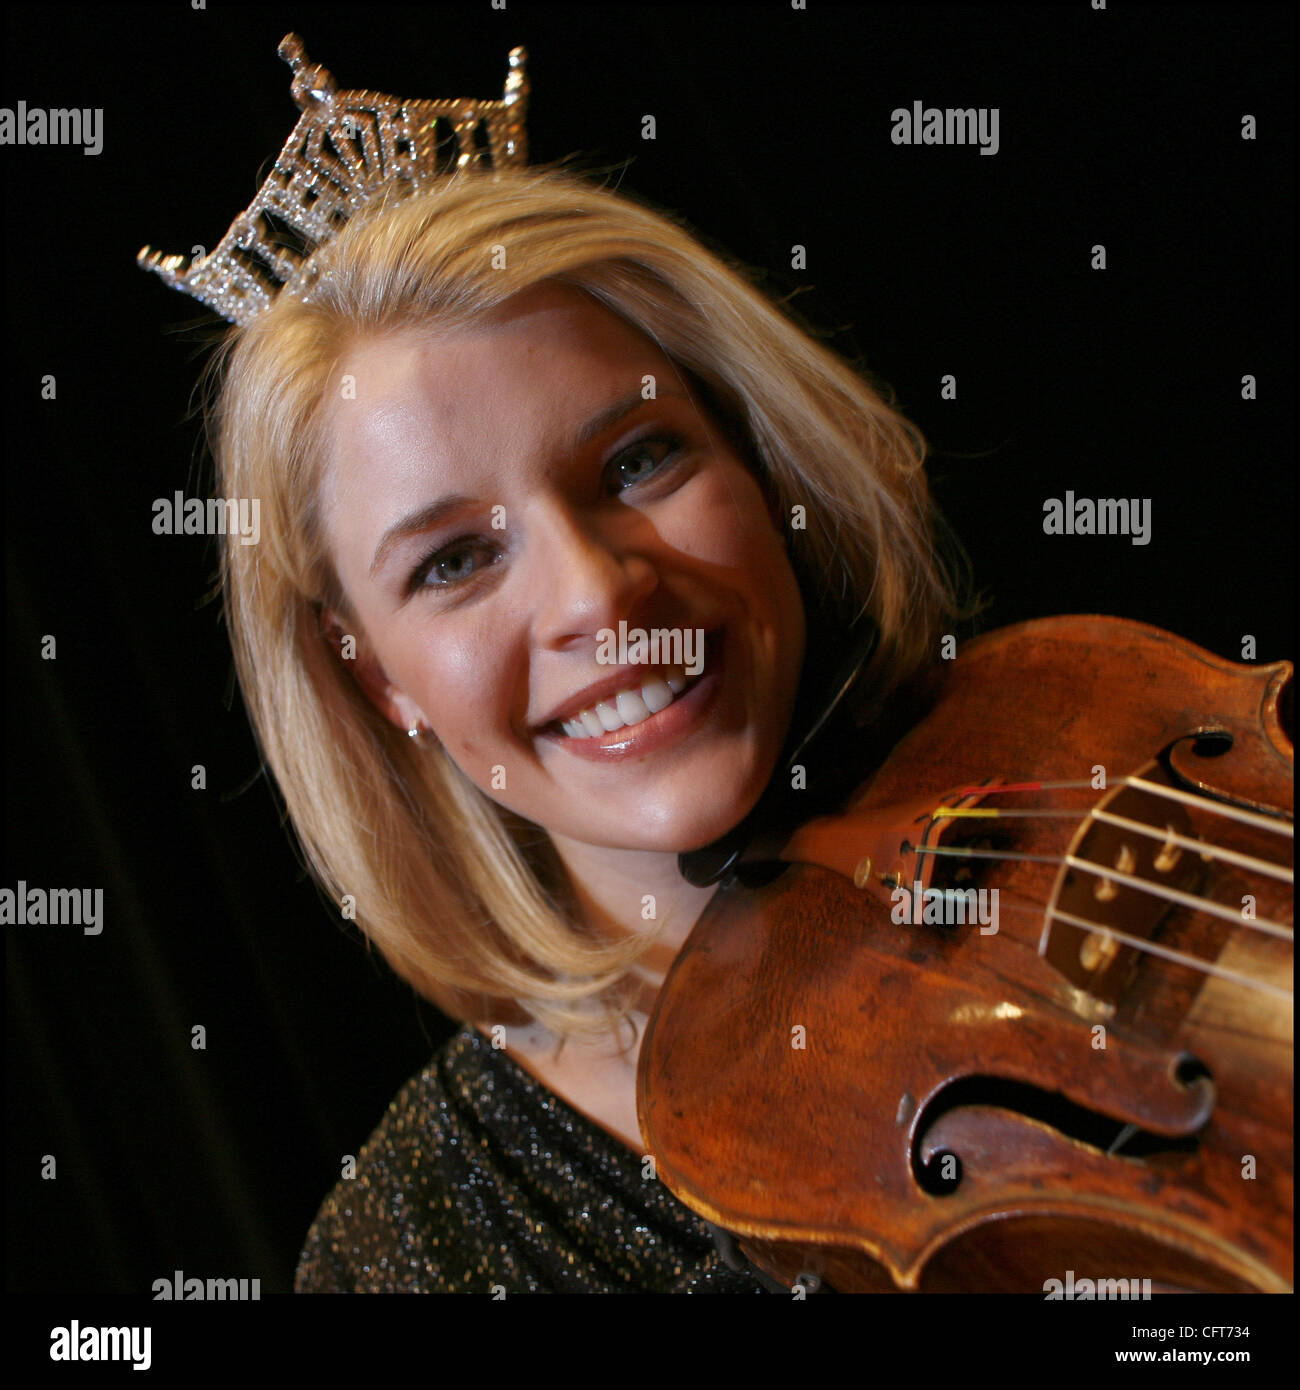 TOM WALLACE • twallace@startribune.com Nicole Swanson, the 23-year-old Miss Minnesota from Lakeville is a violist, who is making music education her platform in her run for Miss America (the pageant is Jan. 29 in Los Vegas). She played Dec. 9 at a free holiday concert for the Minnesota Youth Symphon Stock Photo